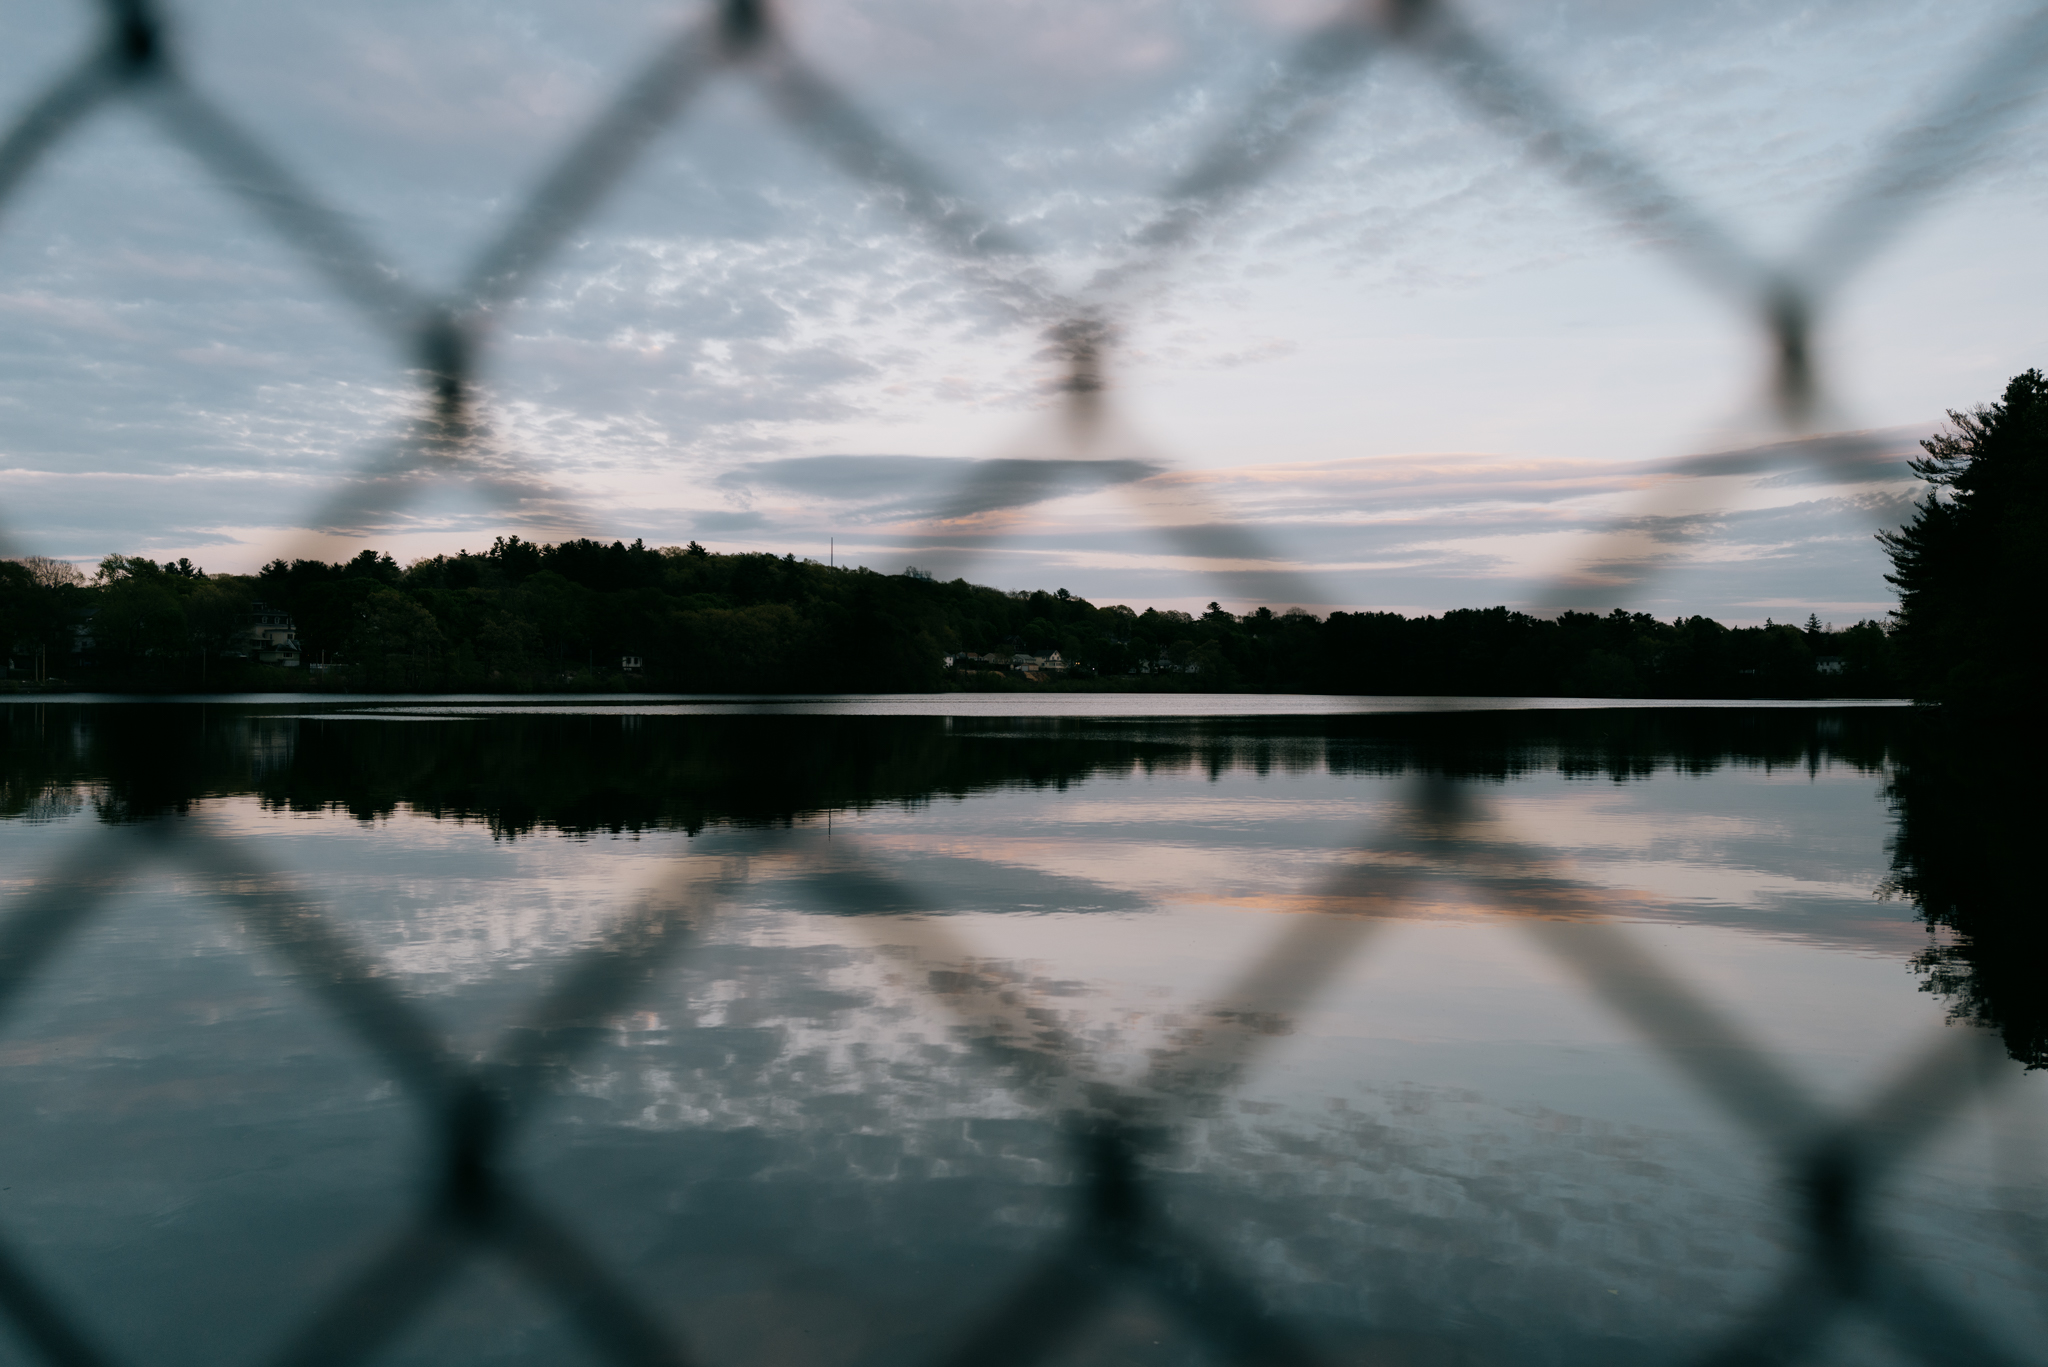 Sunset over a lake in Massachusetts. Image captured with a Leica Q2.